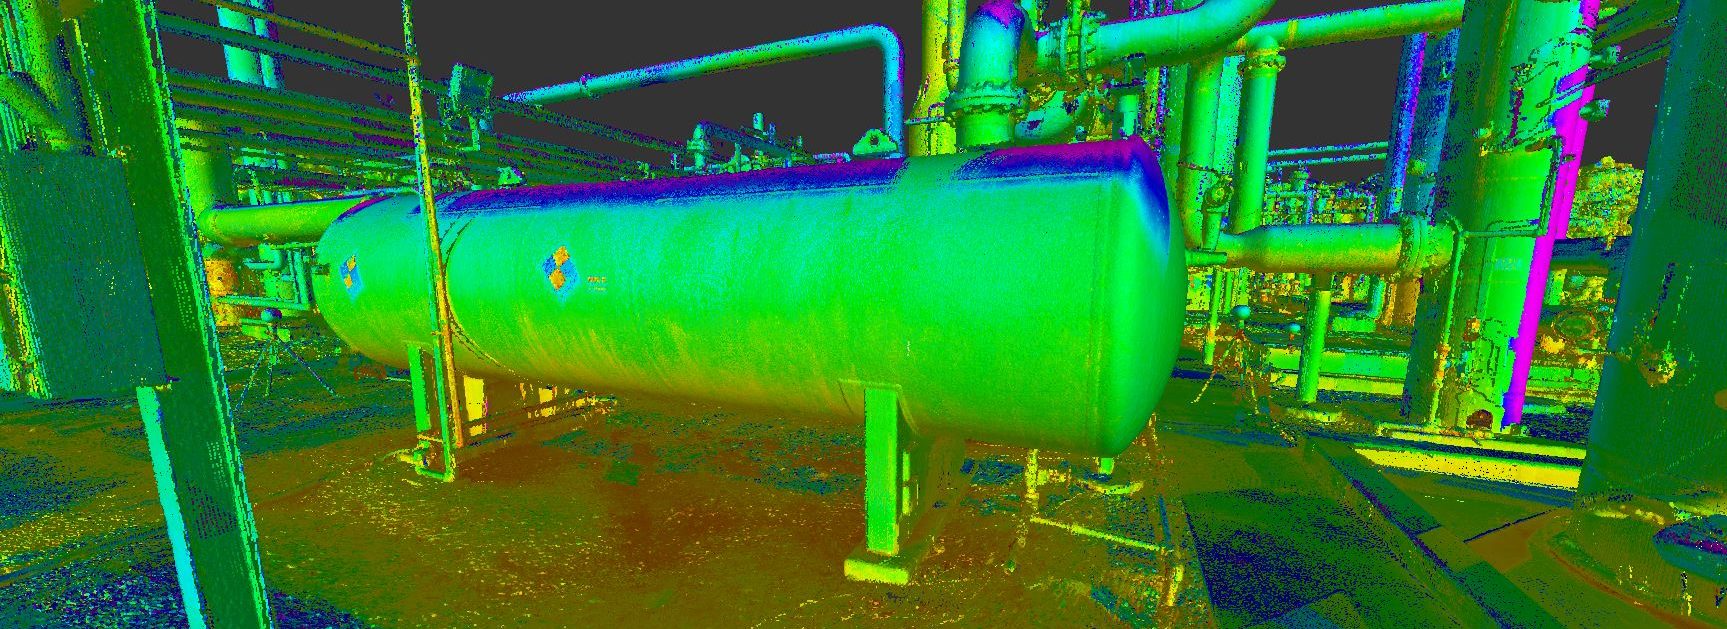 industrial and pipes laser scan